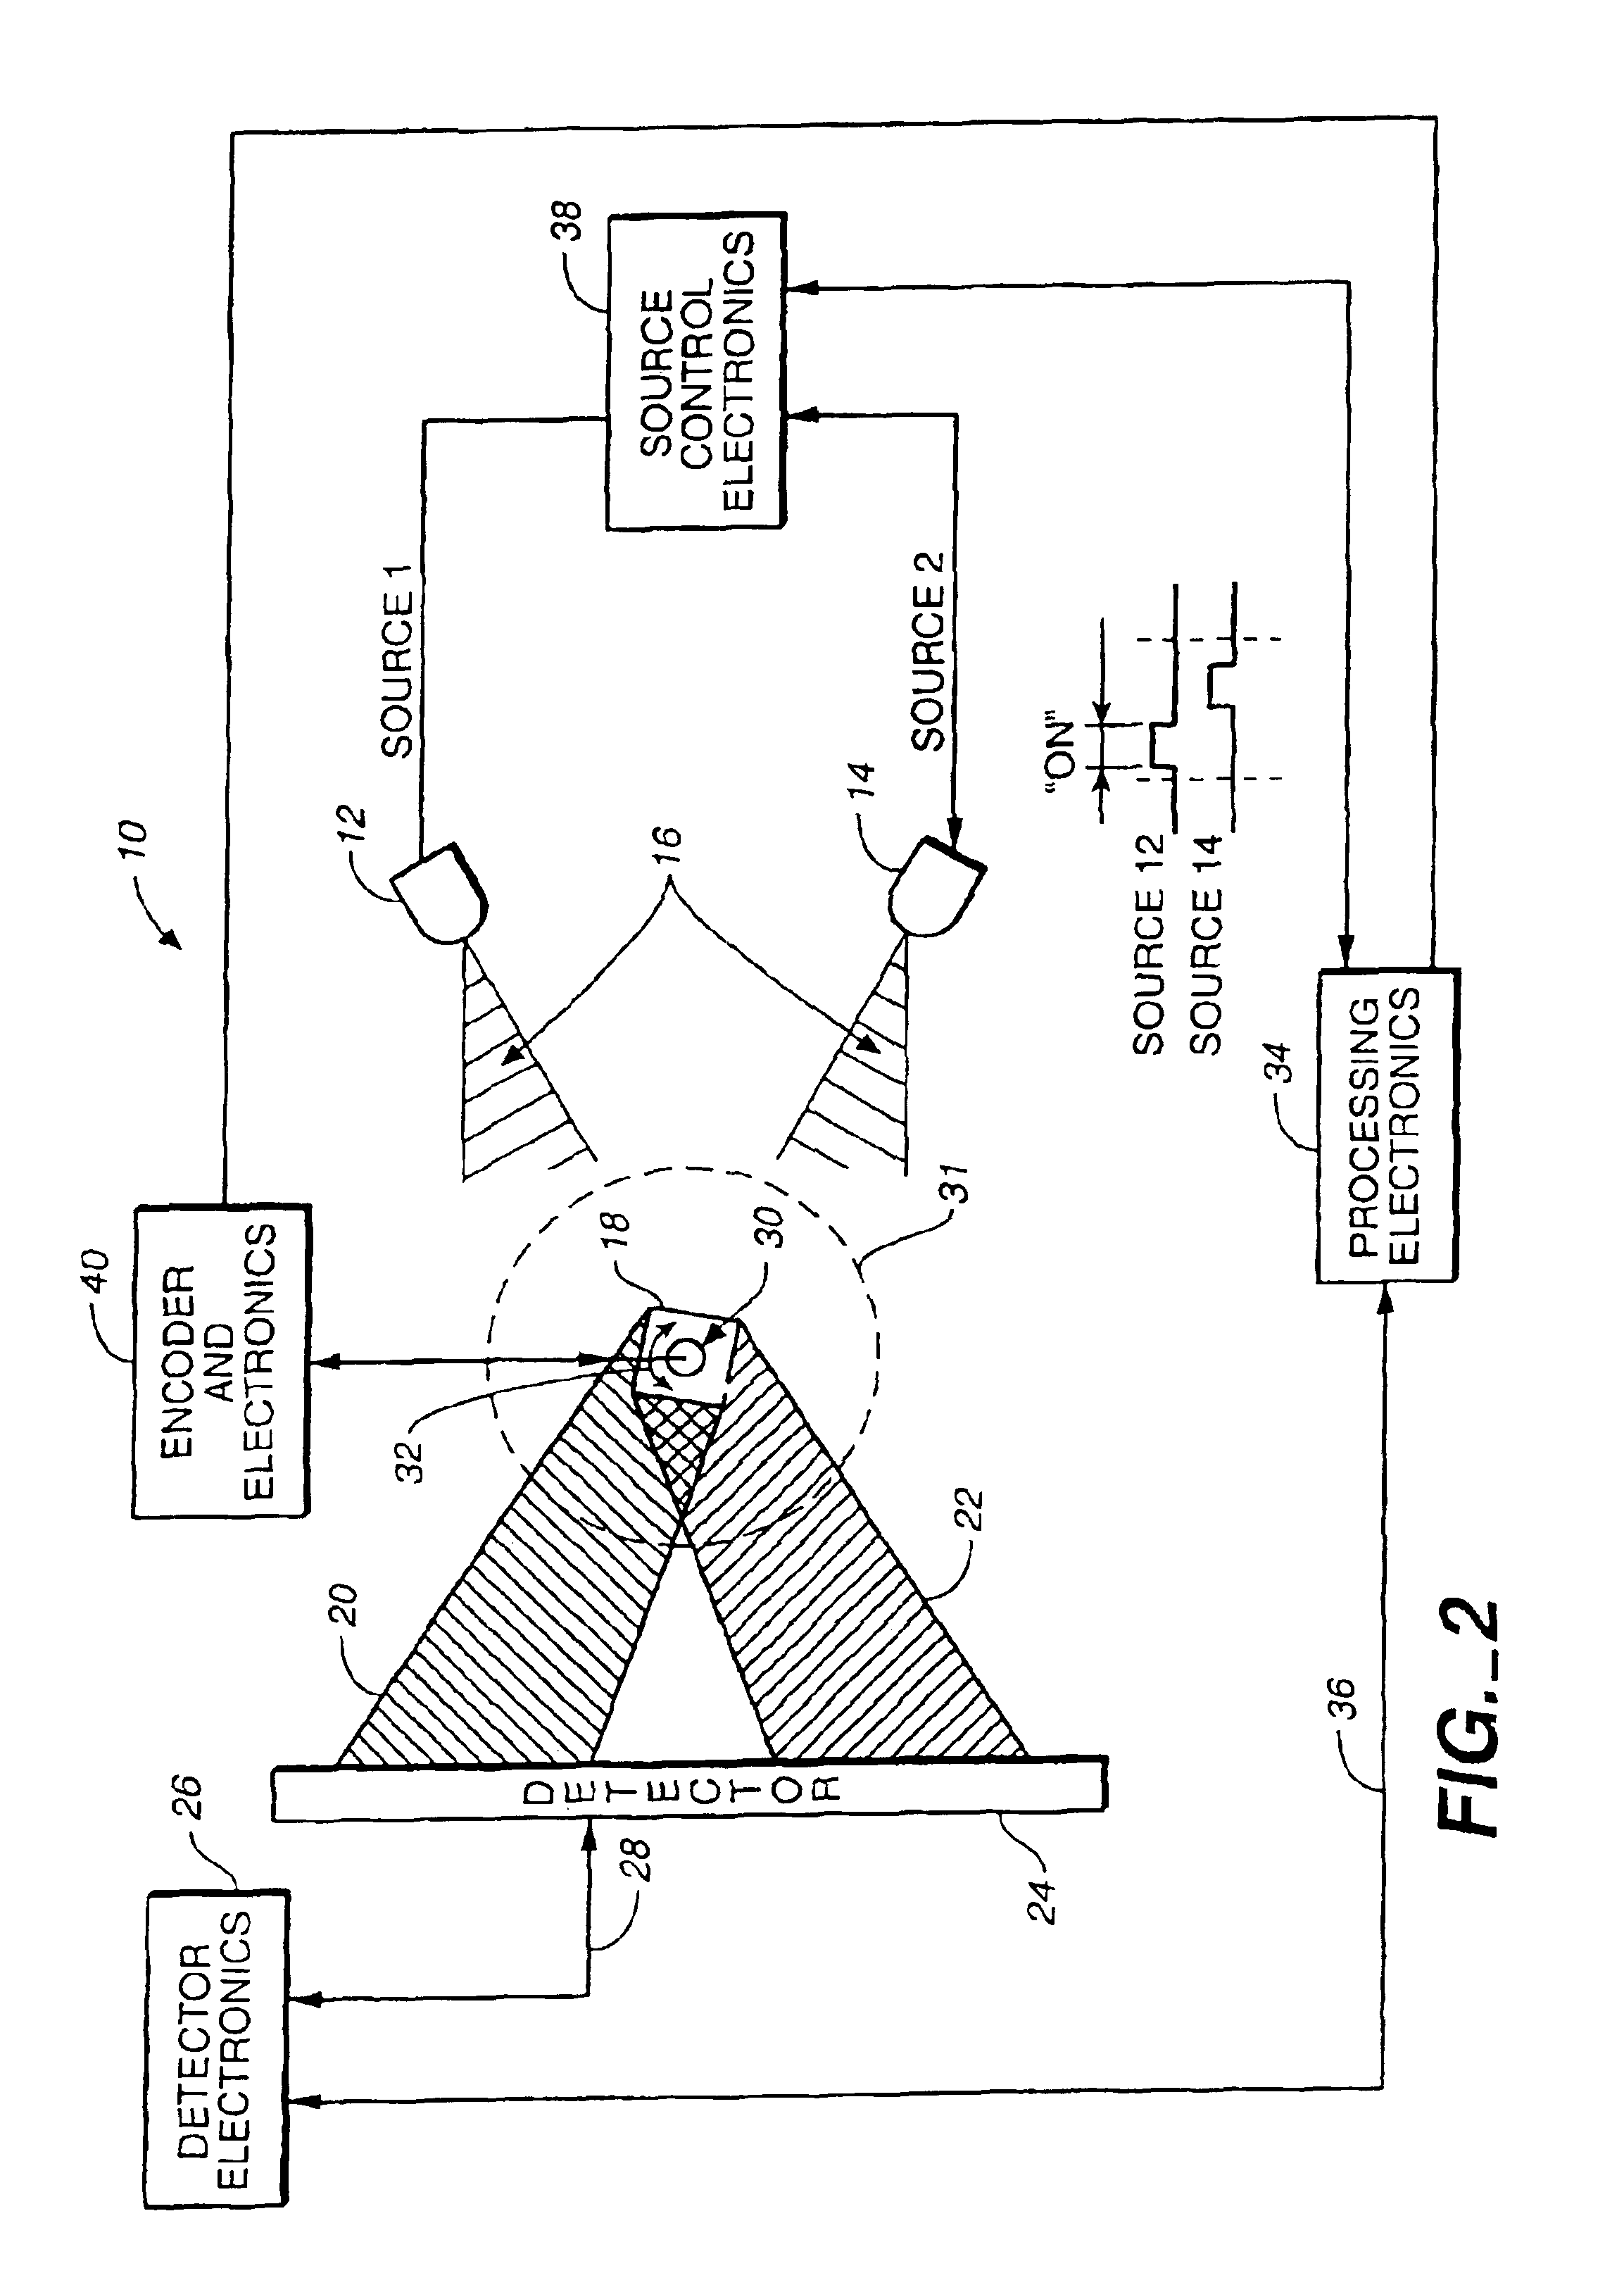 Multiple source alignment sensor with improved optics